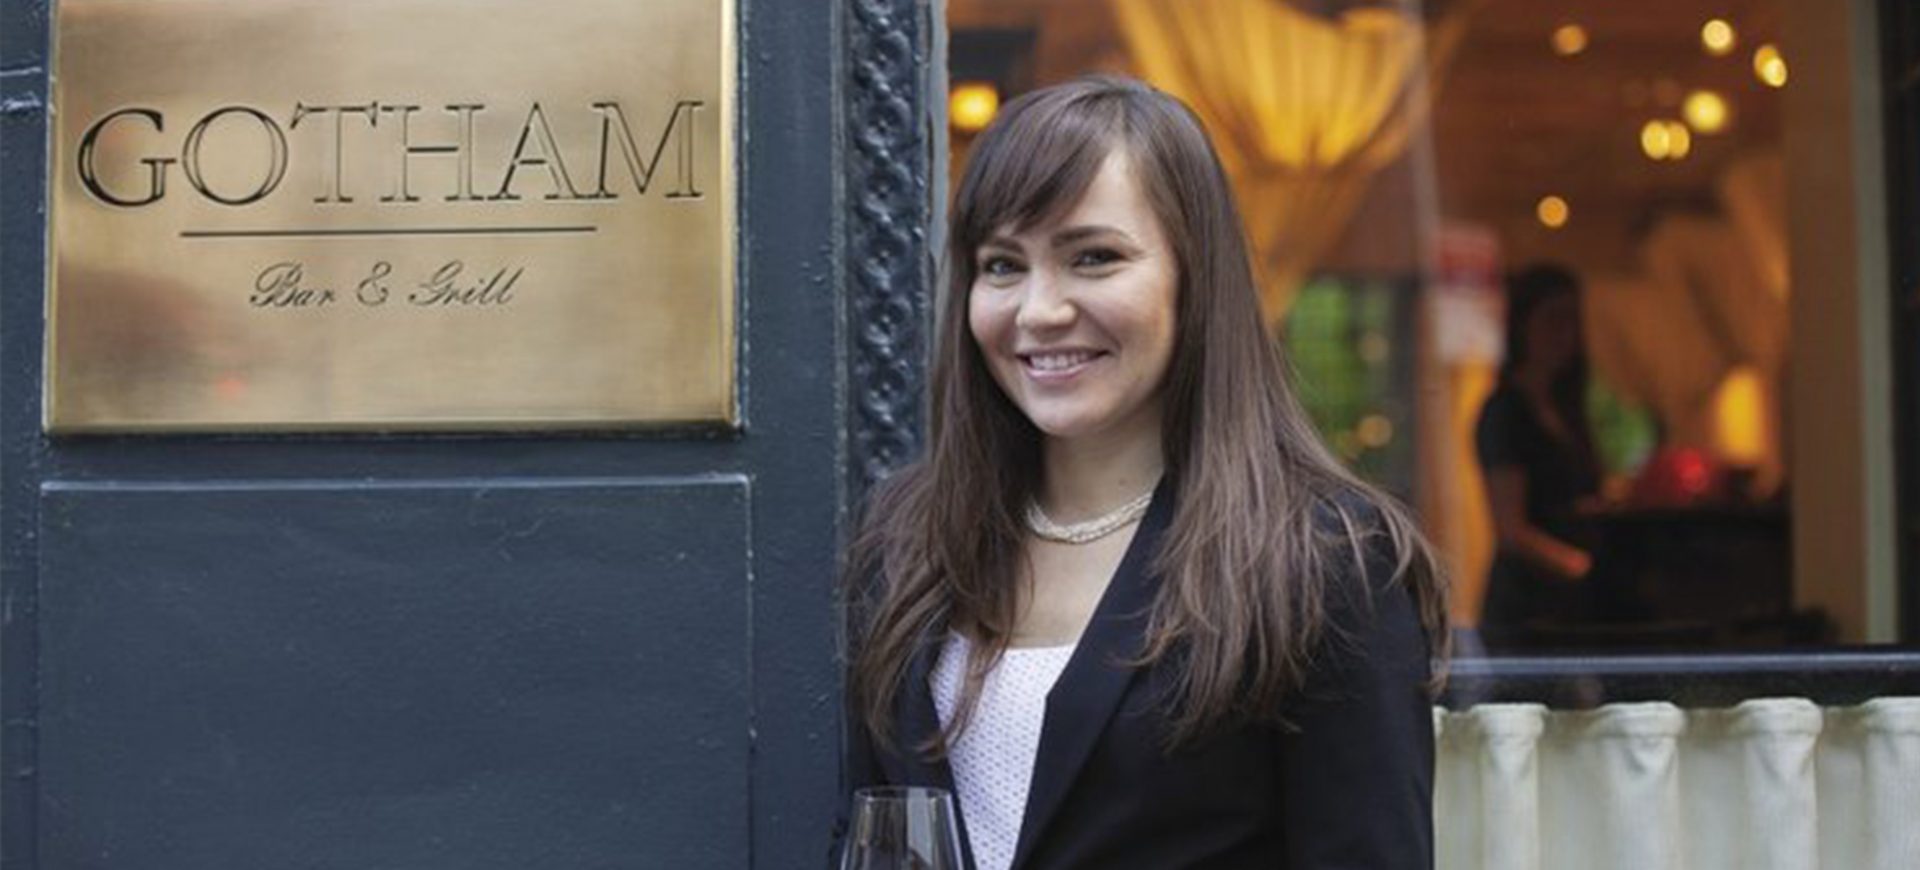 Somm Thoughts: Heidi Turzyn, Beverage Director at Gotham Bar and Grill